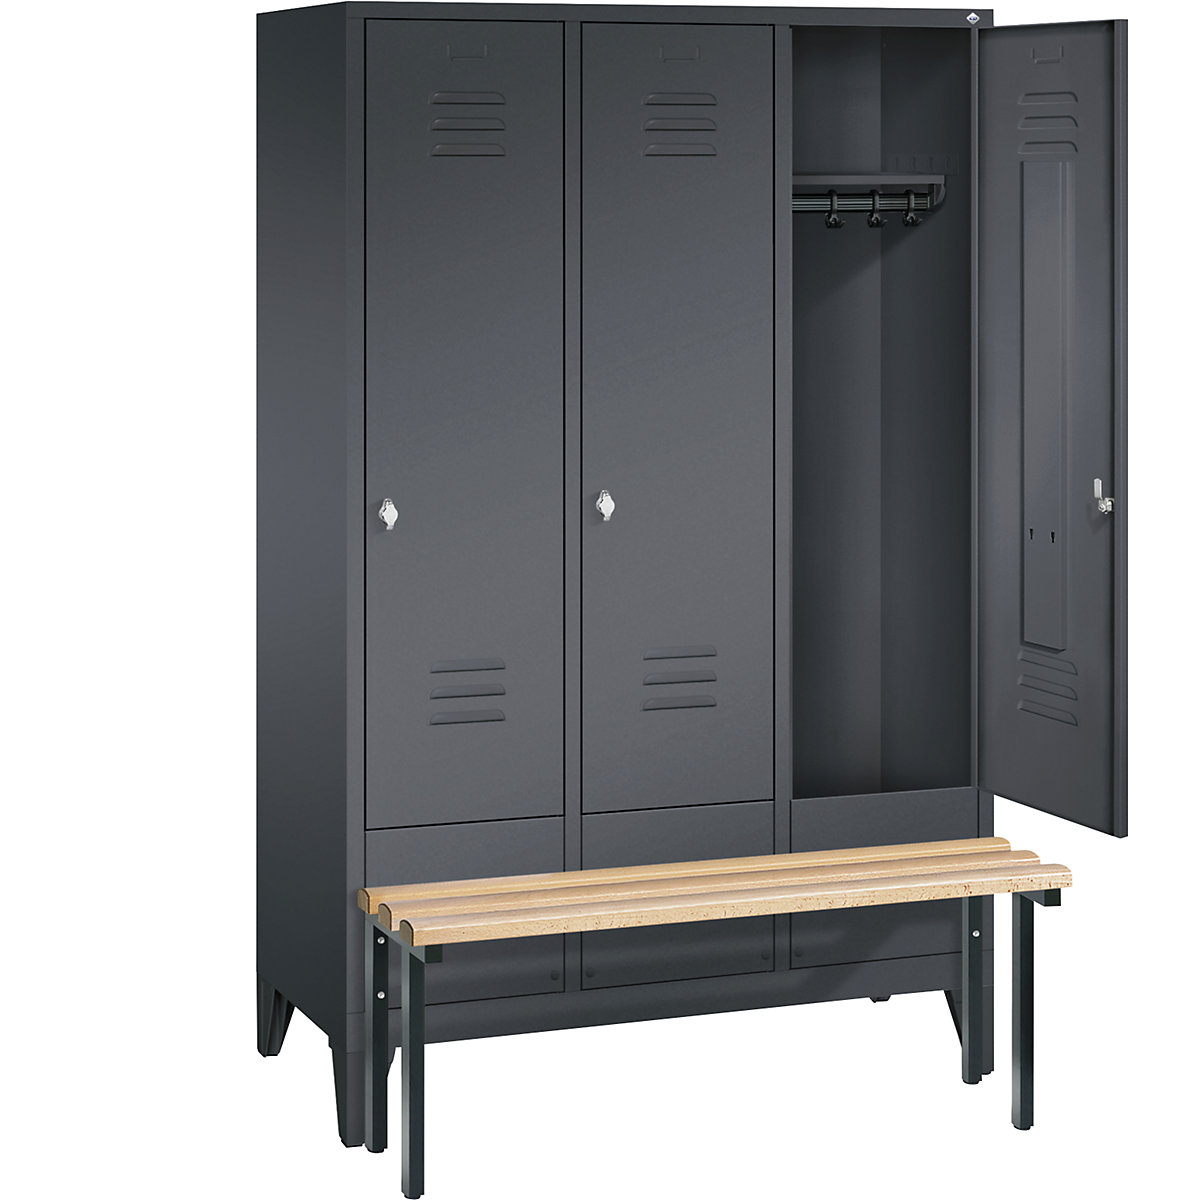 CLASSIC cloakroom locker with bench mounted in front – C+P (Product illustration 19)-18